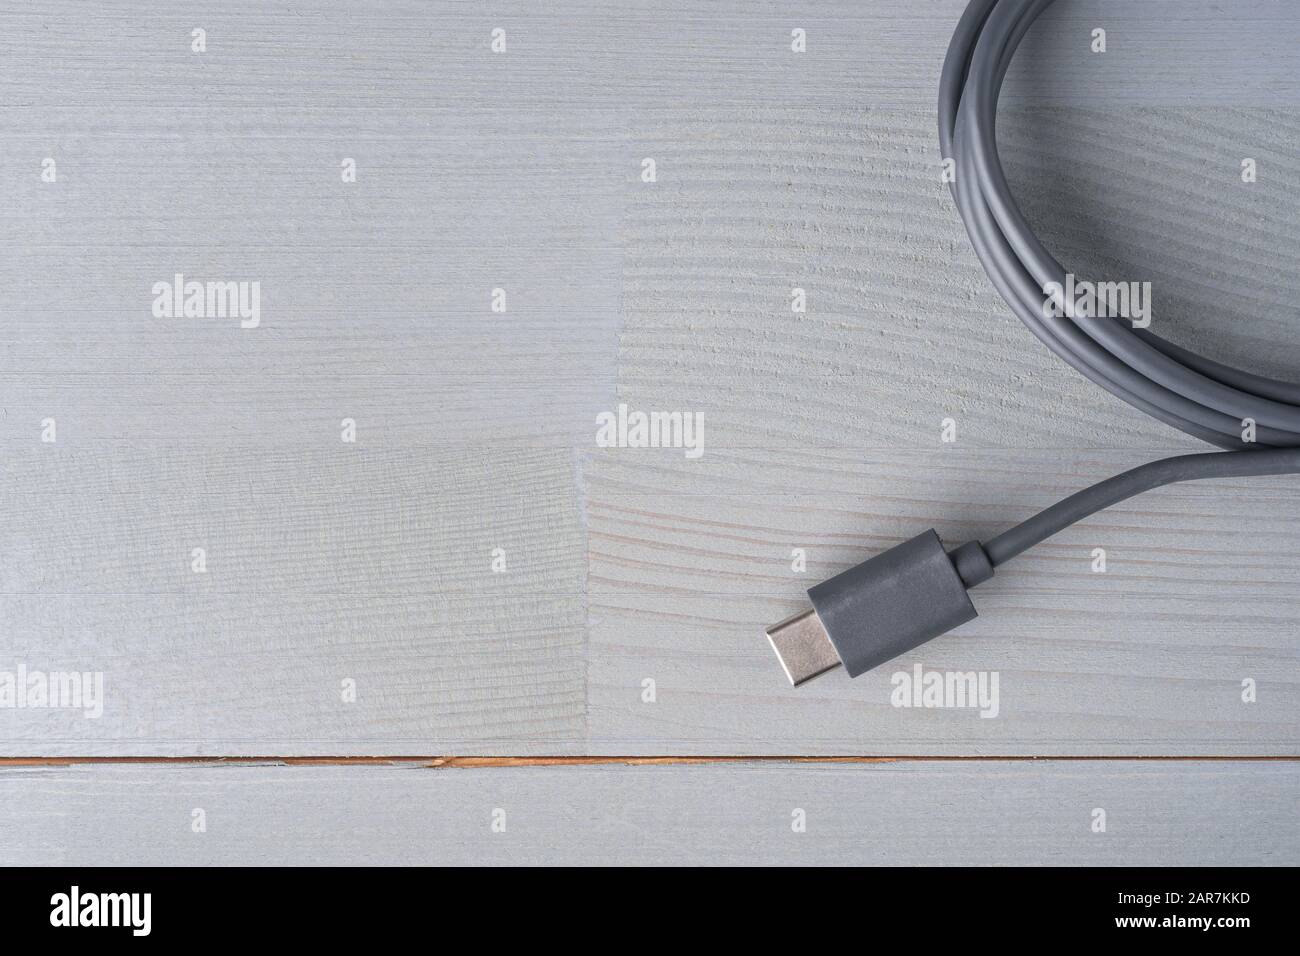 USB Type C connector with a grey cable on a wooden background. Flat lay top view. Large copy space on the left. Stock Photo